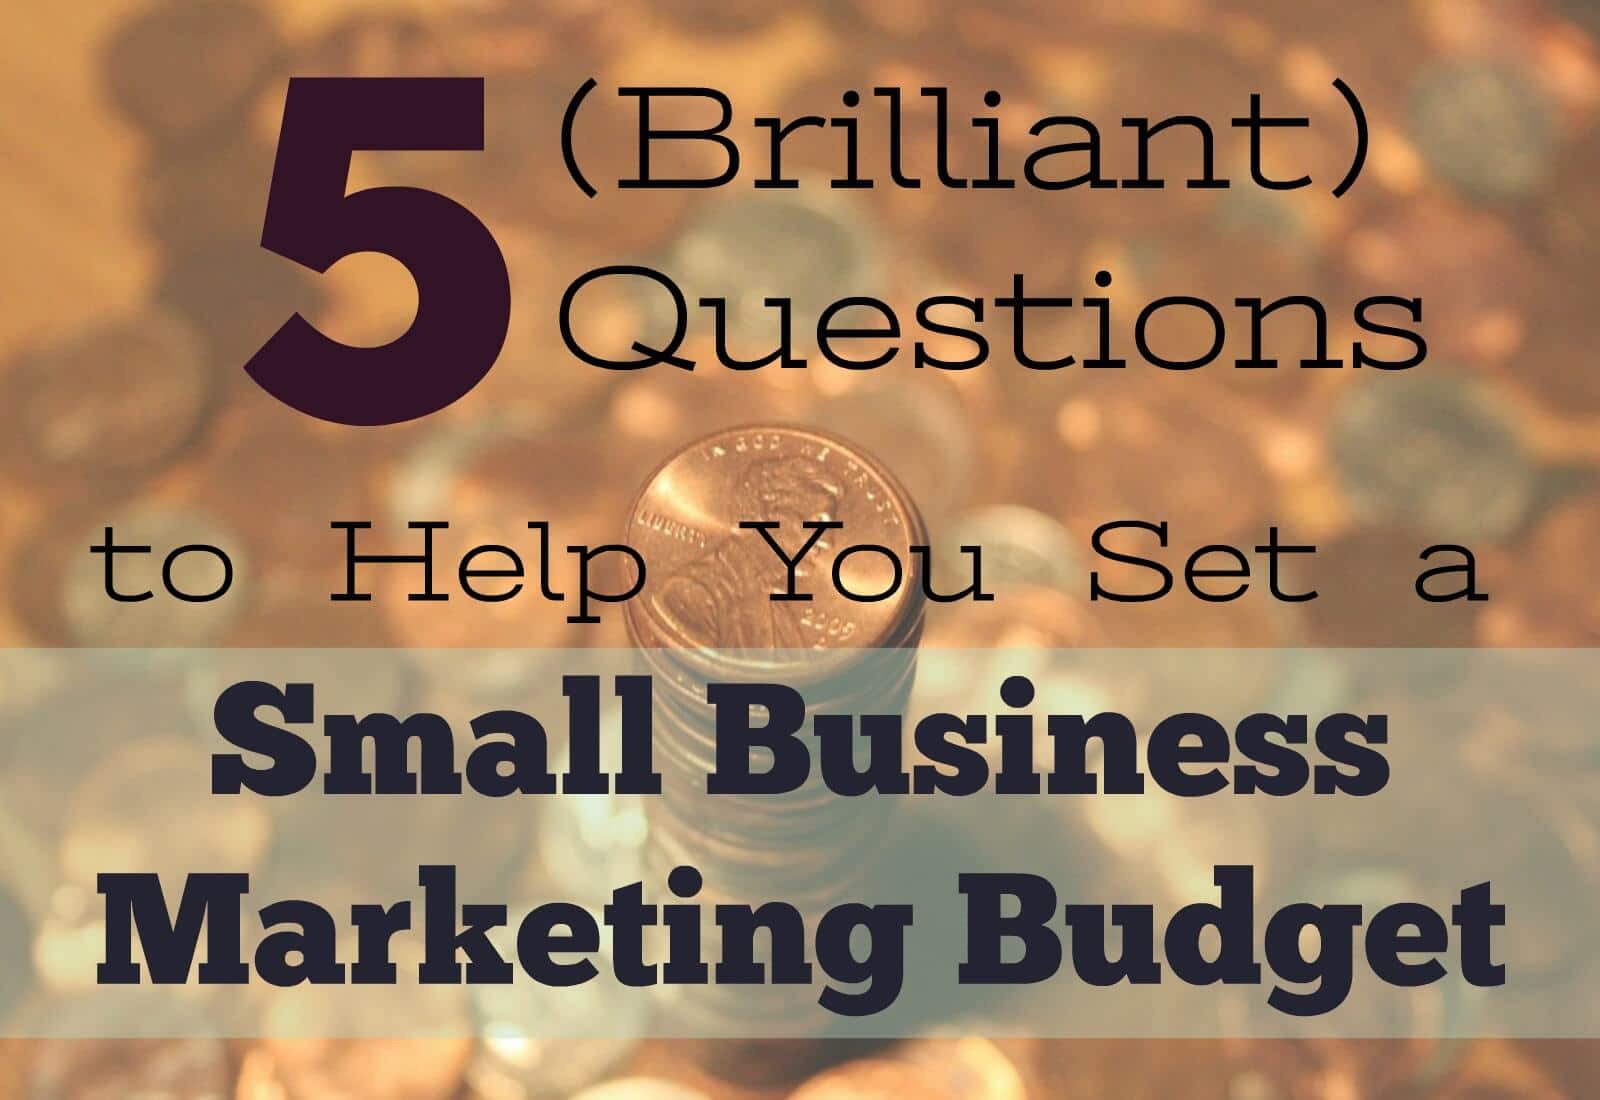 5 (Brilliant) Questions to Help You Set a Small Business Marketing Budget